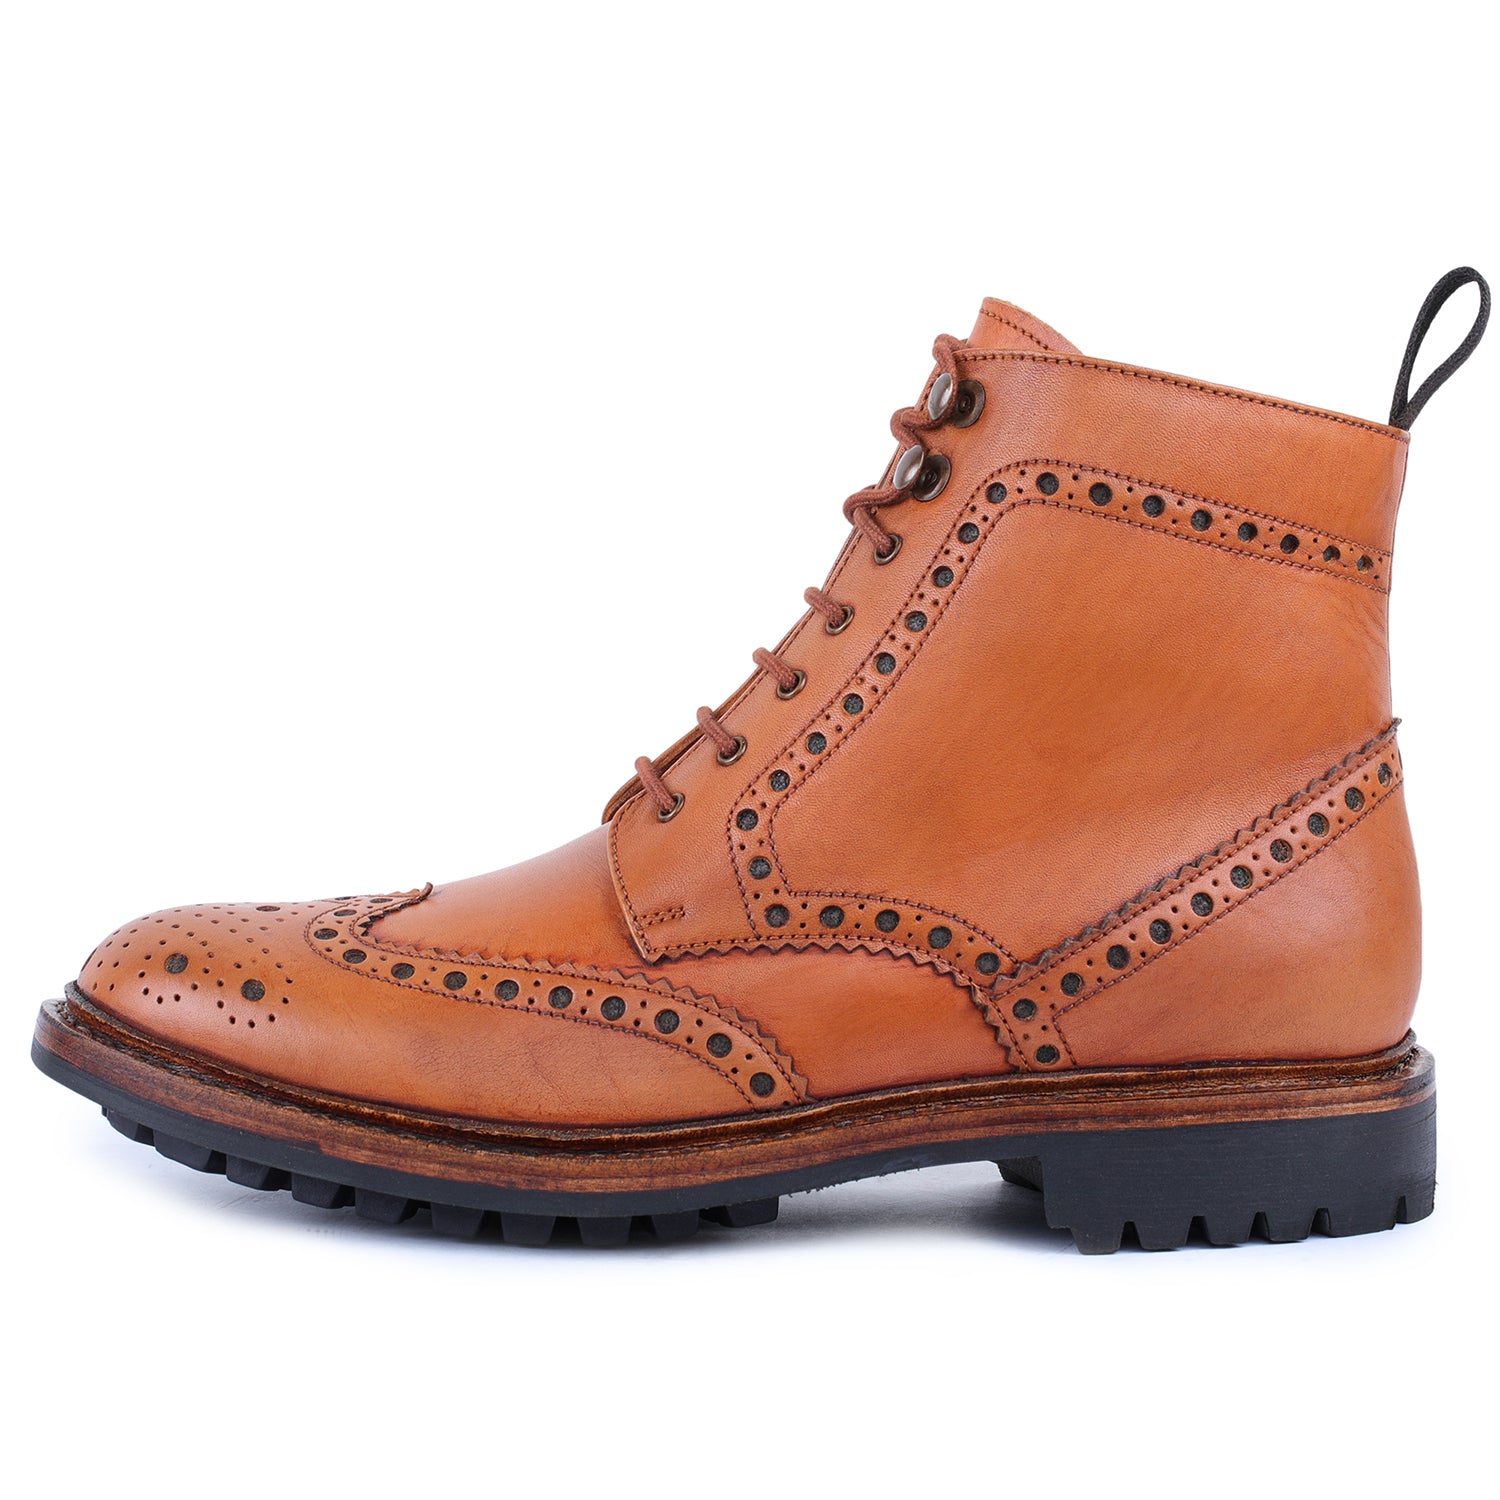 Goodyear Welted Wingtip Brogue lace Up Boots- Tan by Lethato